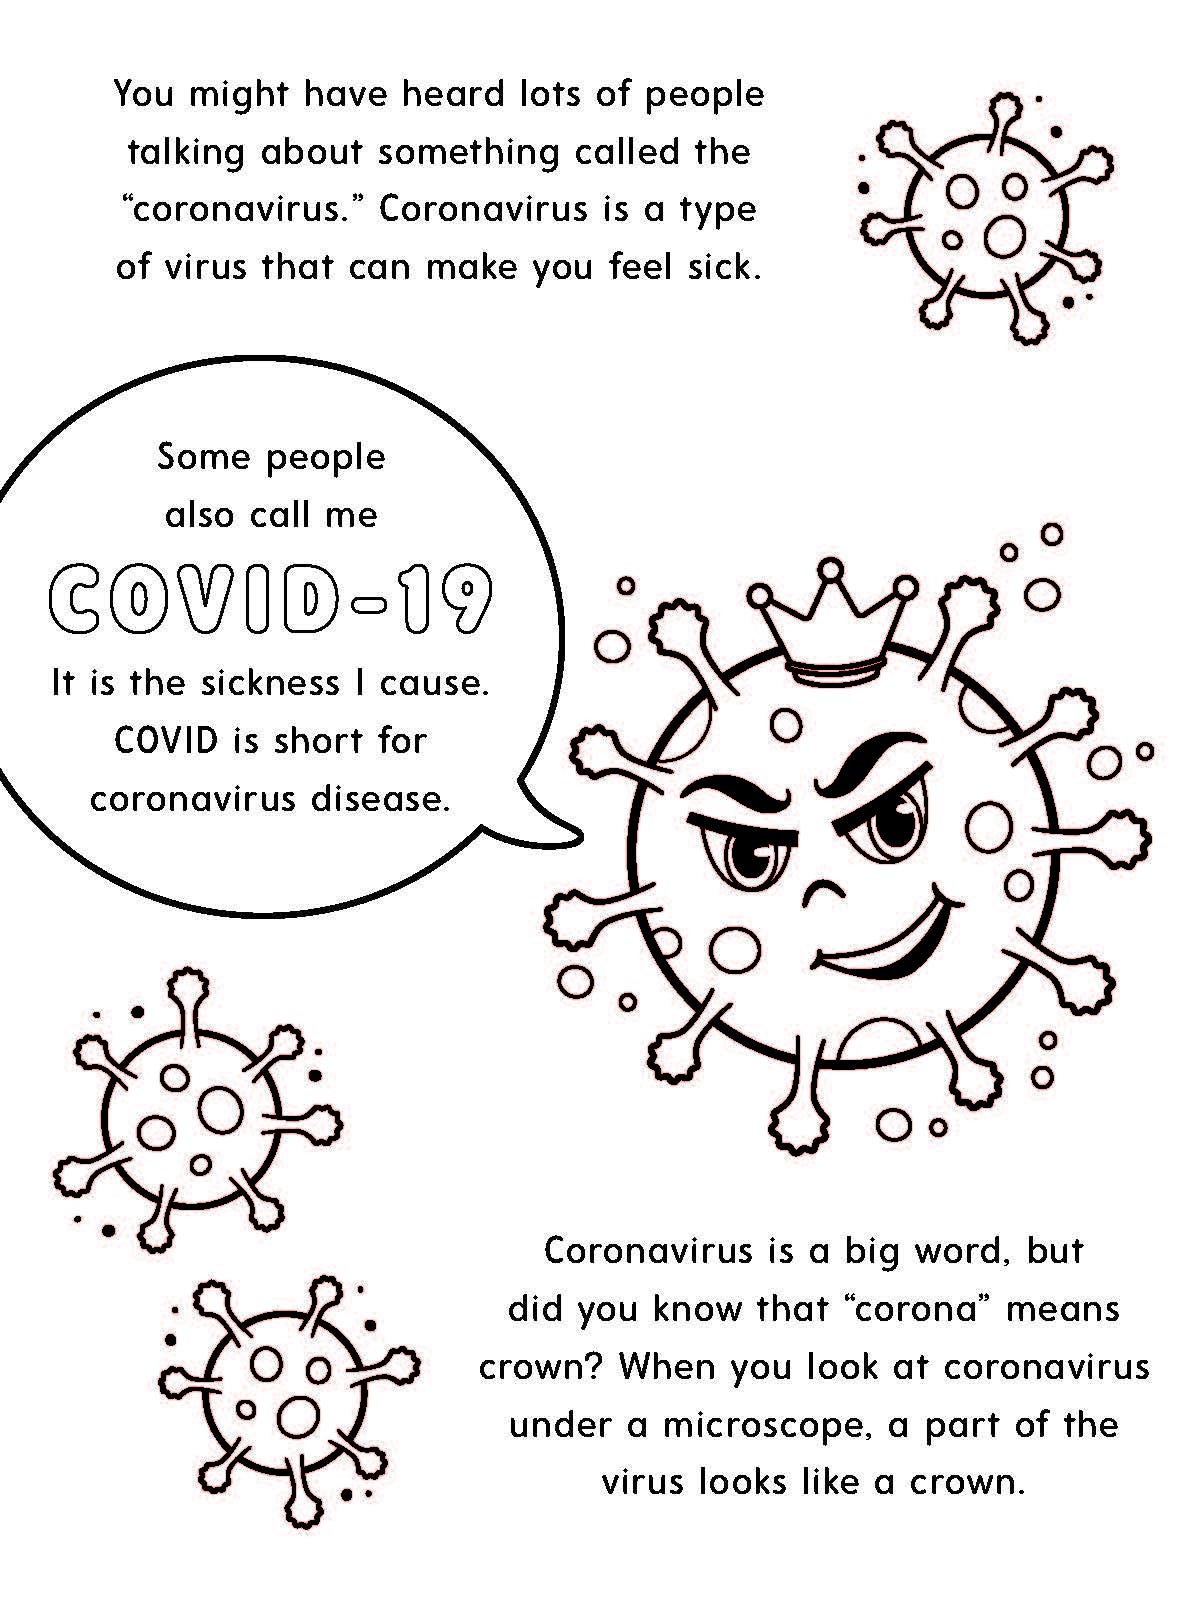 St. Jude creates a coronavirus coloring book for its patients